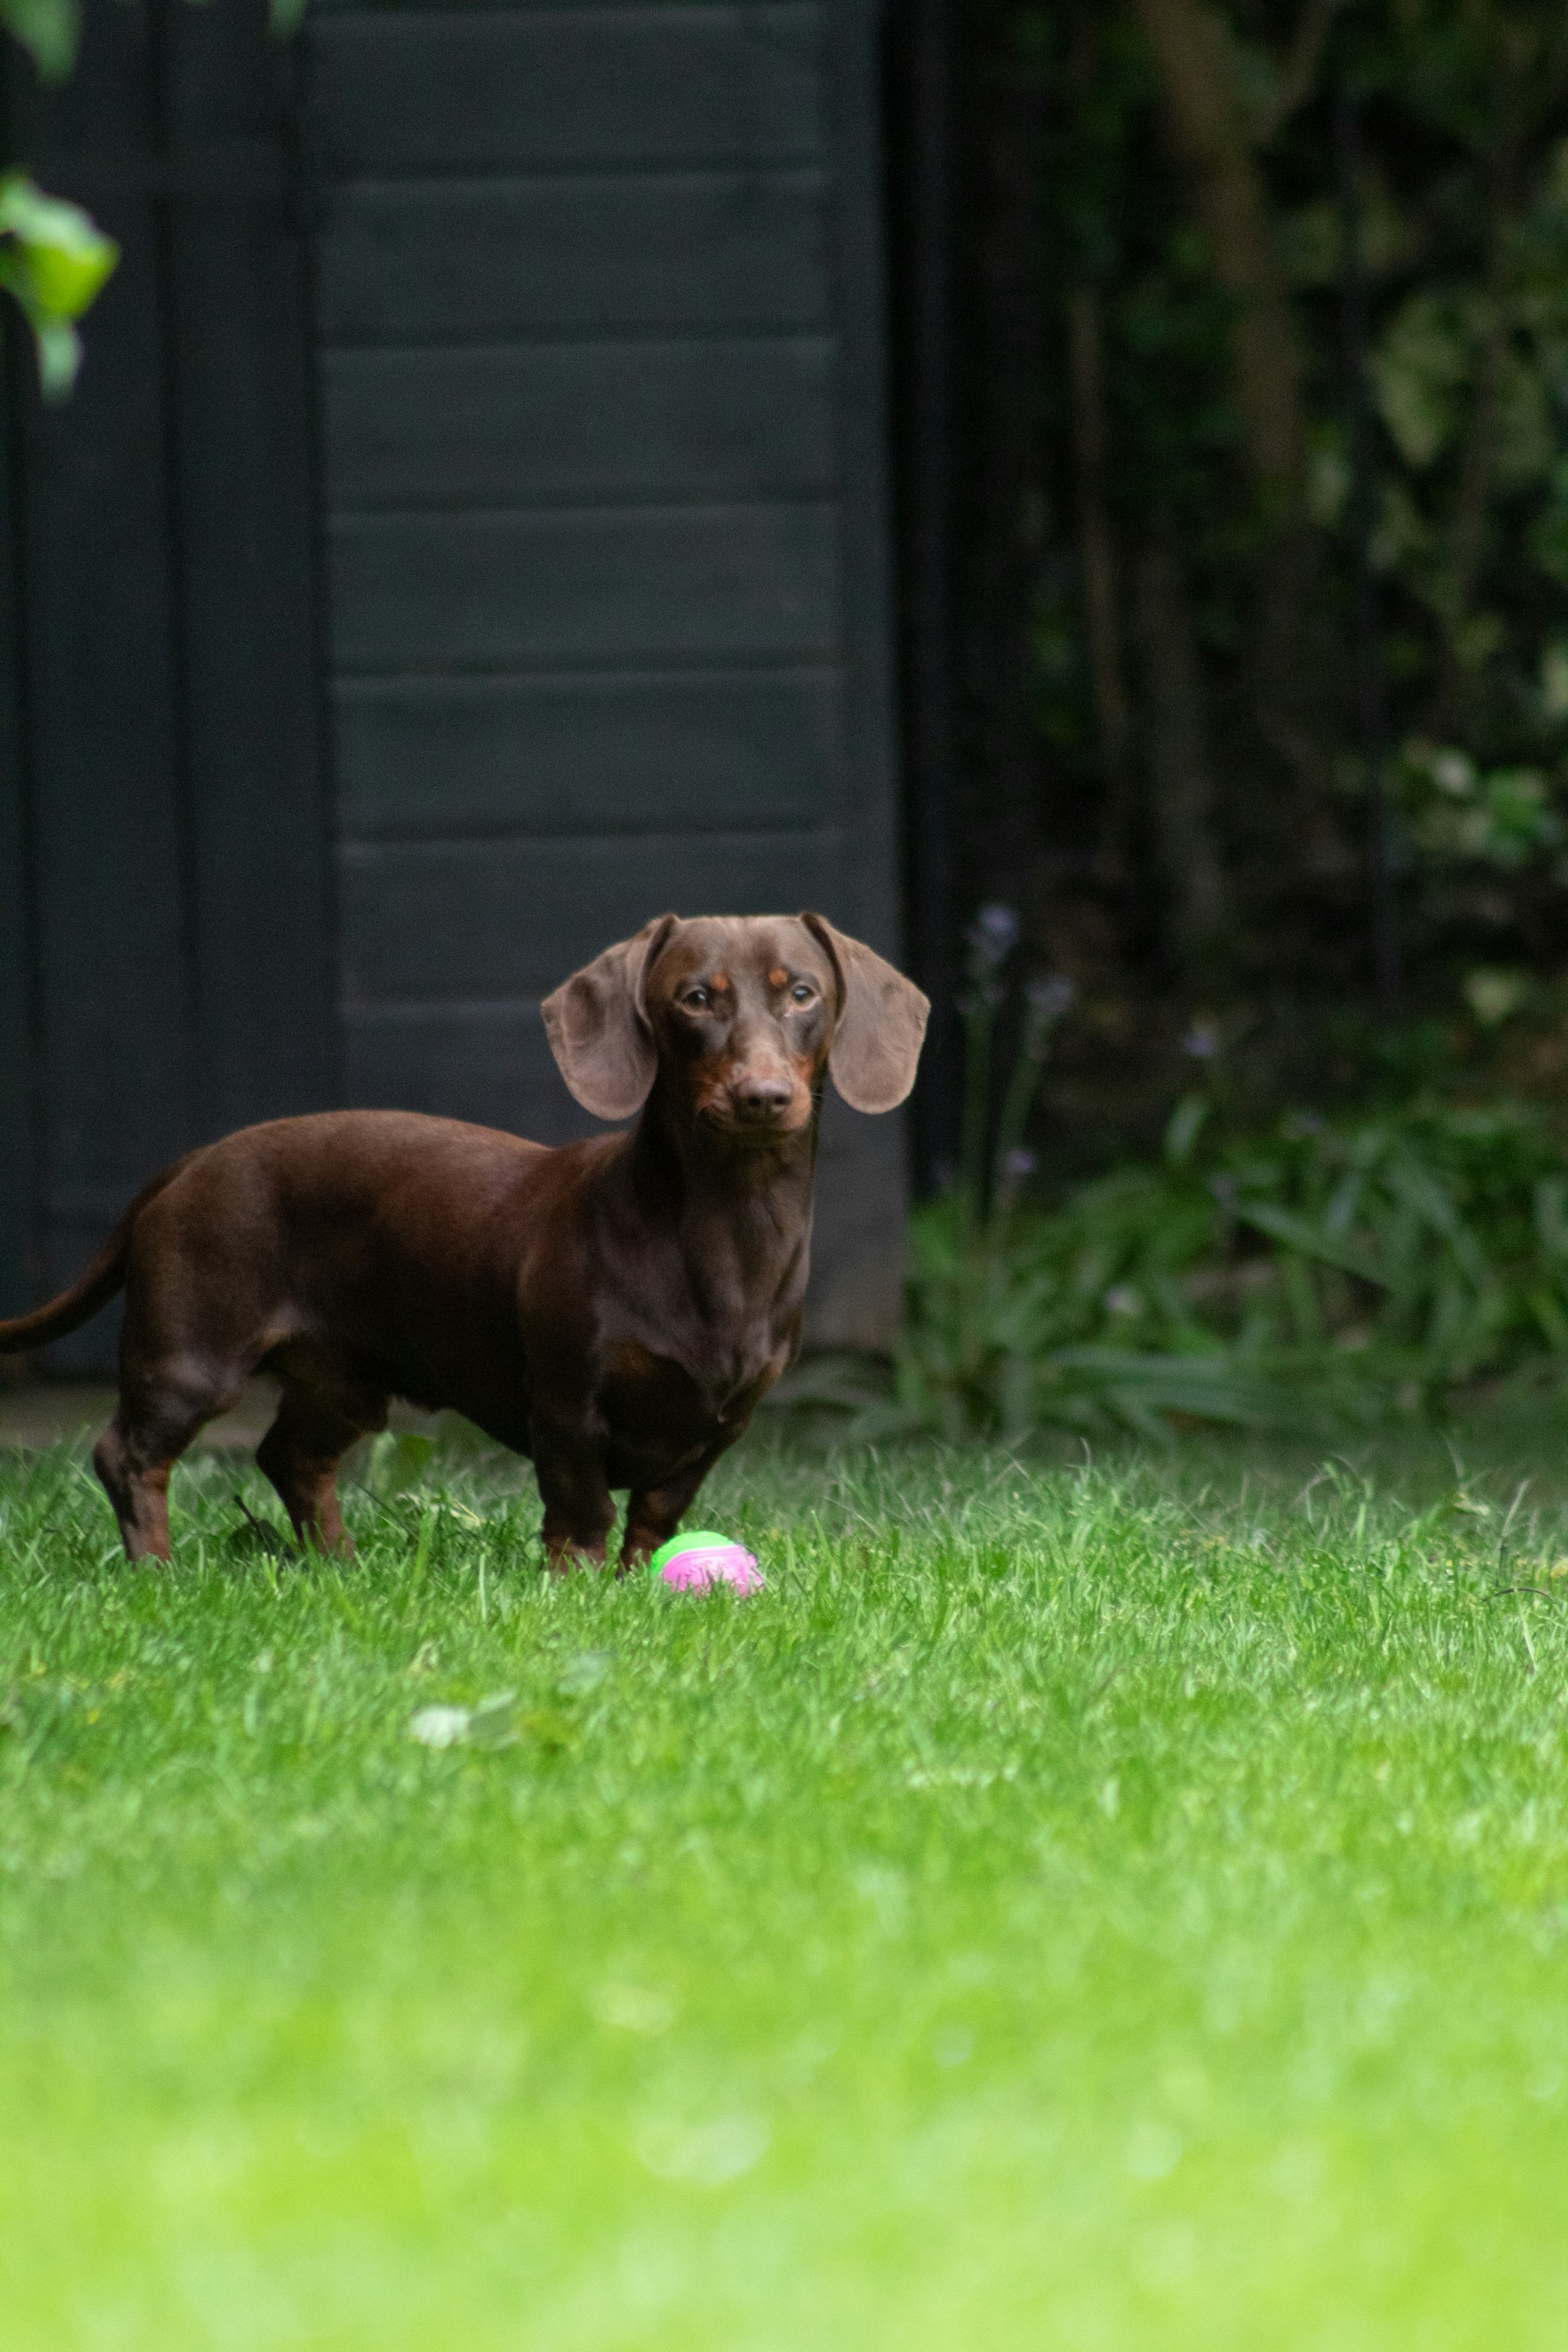 Are Dachshunds Easy to Train?